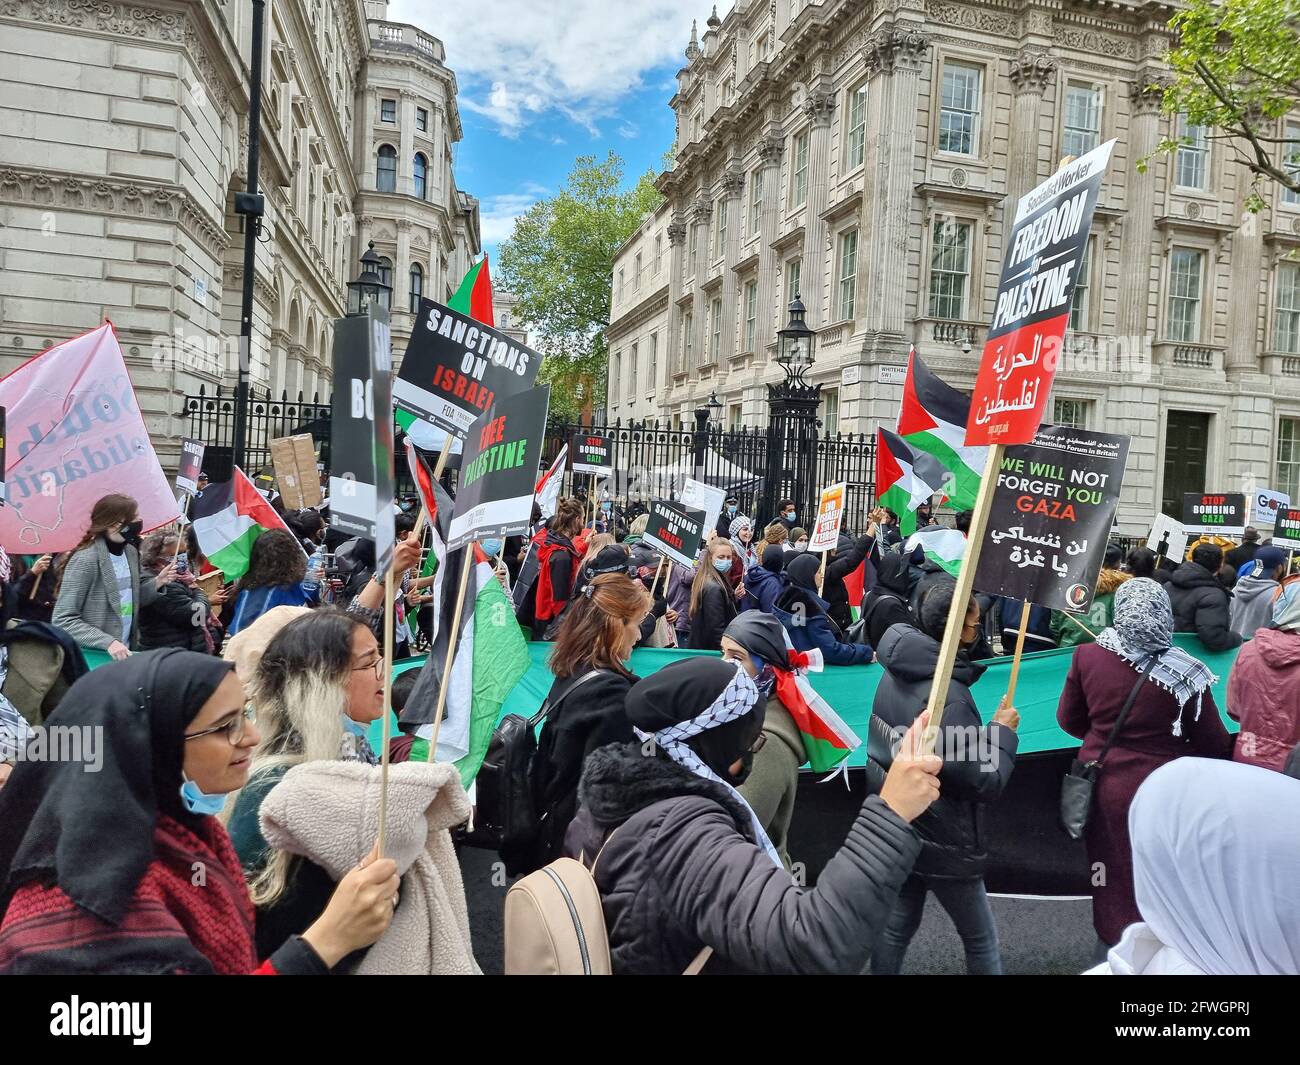 Central London, England. 22nd May 2021. Thousands of people attend a rally in support of free Palestine and an end to illegal occupation of Gaza. Credit: Majority World CIC/Alamy Live News Stock Photo